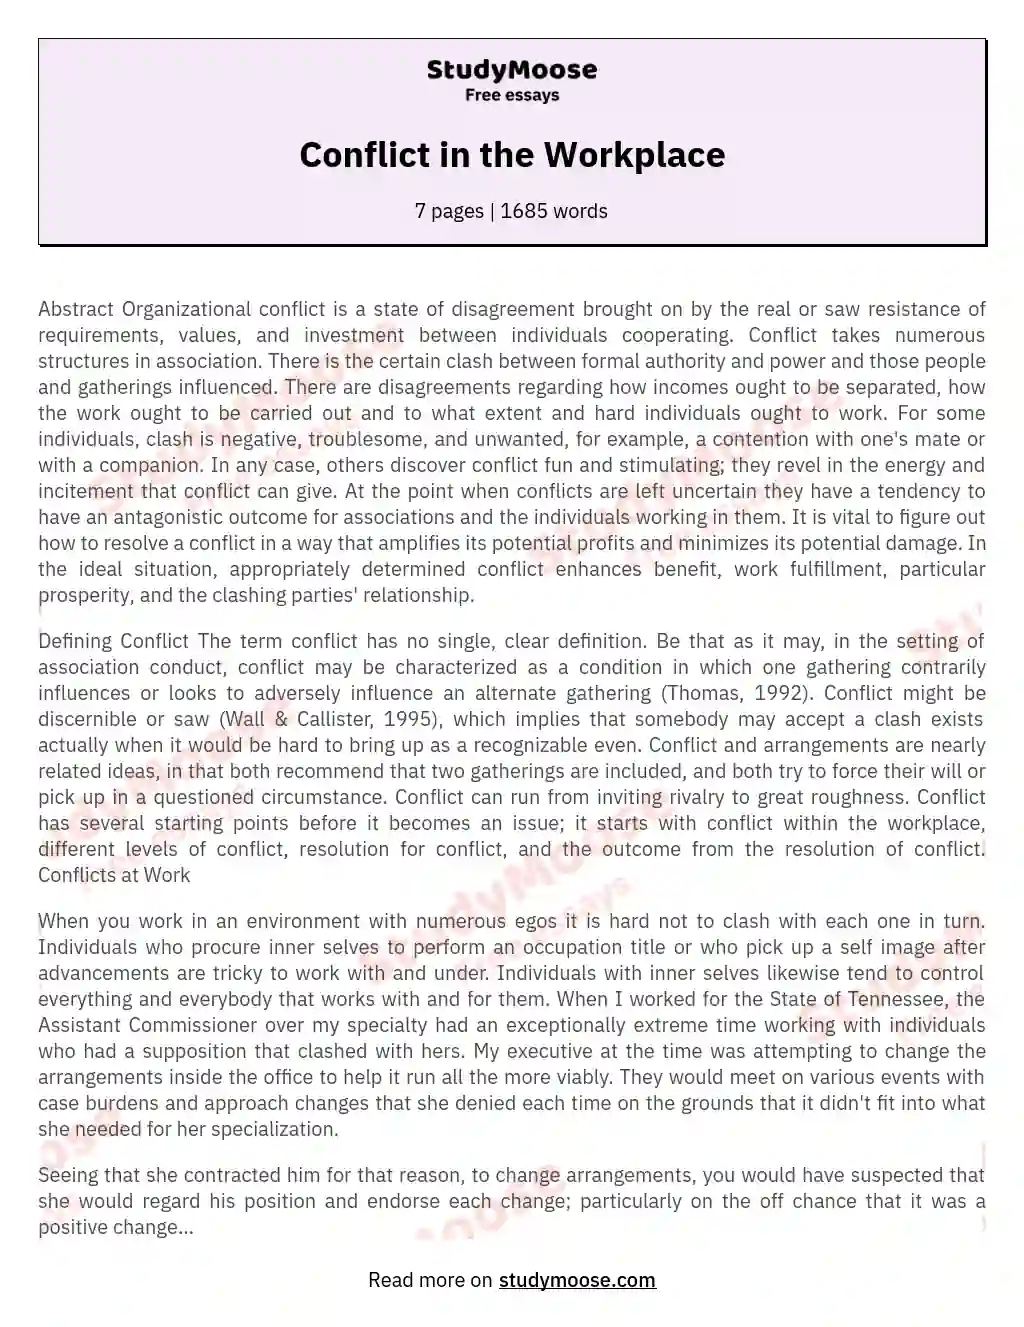 Conflict in the Workplace essay